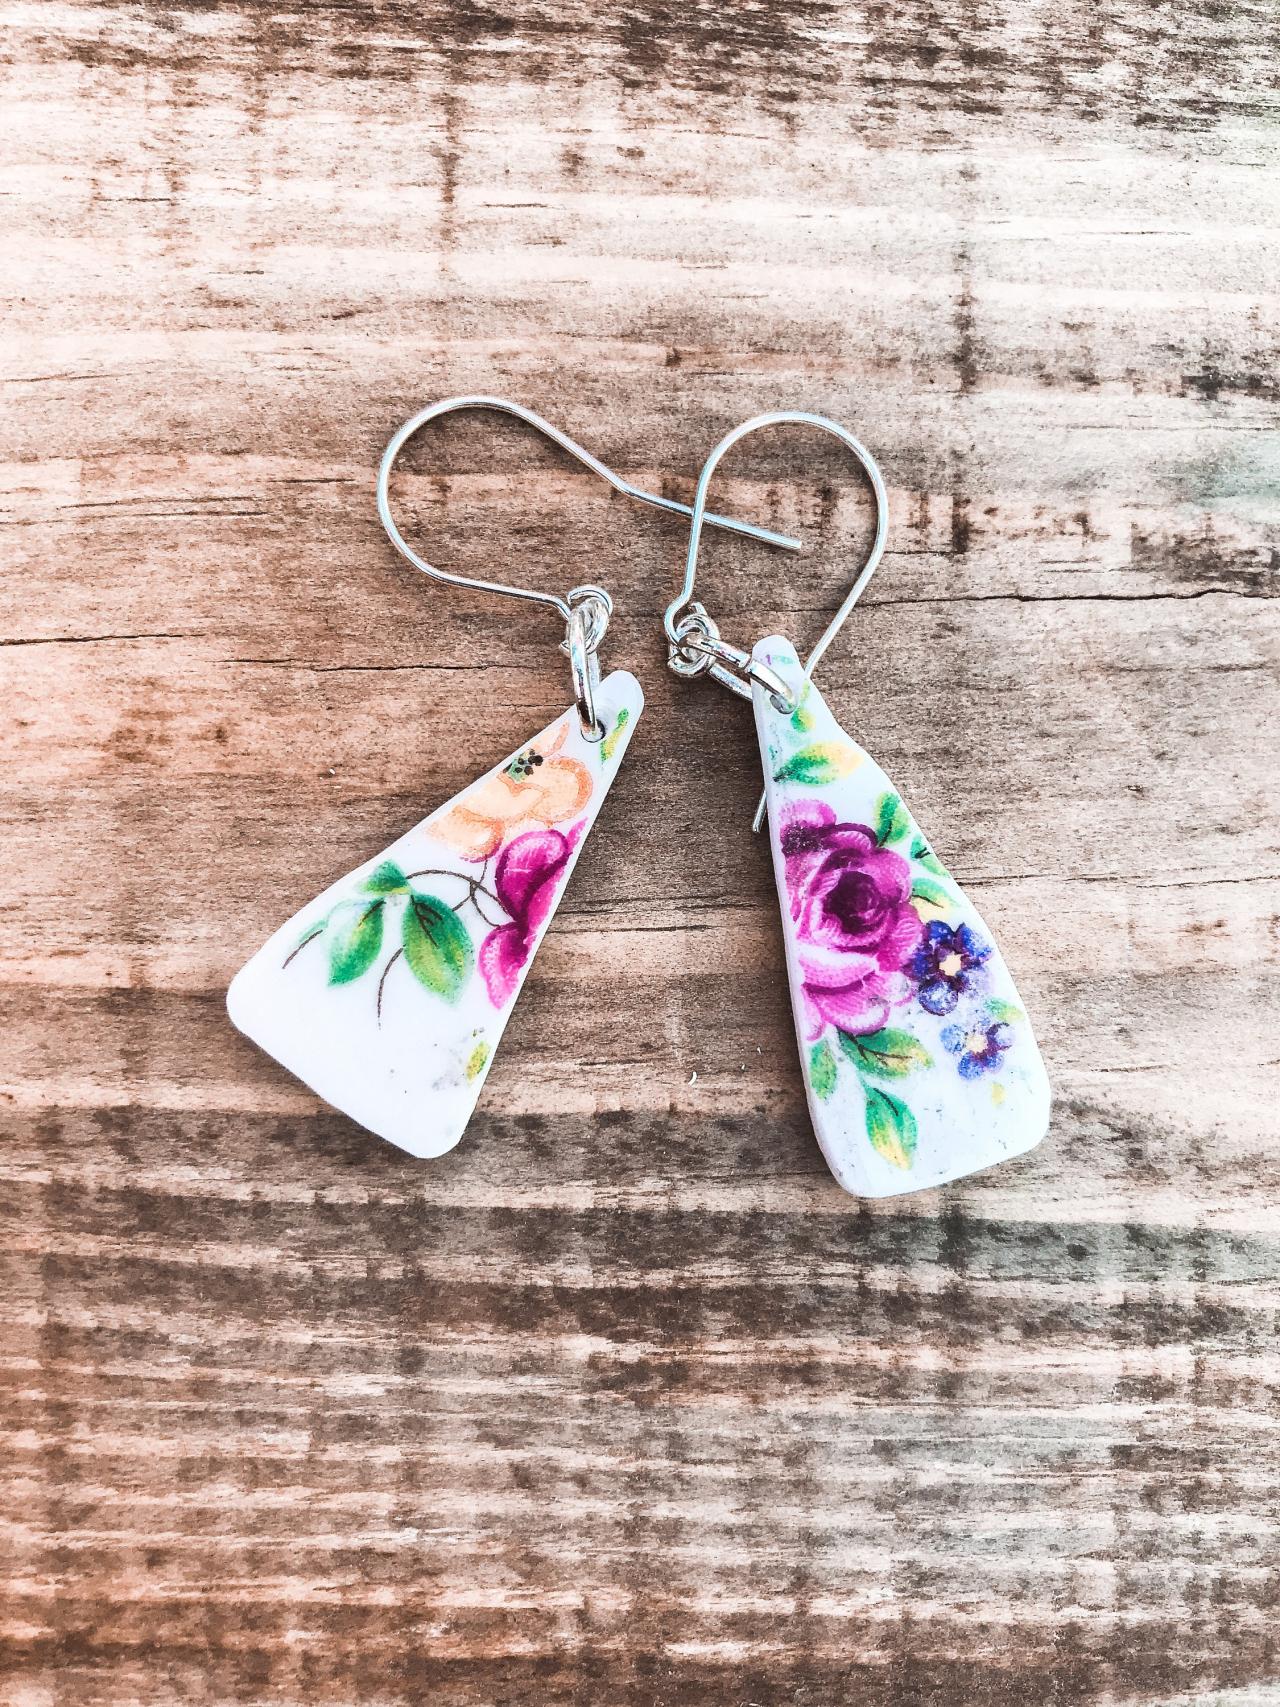 Gorgeous Pink Rose Vintage Recycled Broken China Earrings With Sterling Silver Wires.